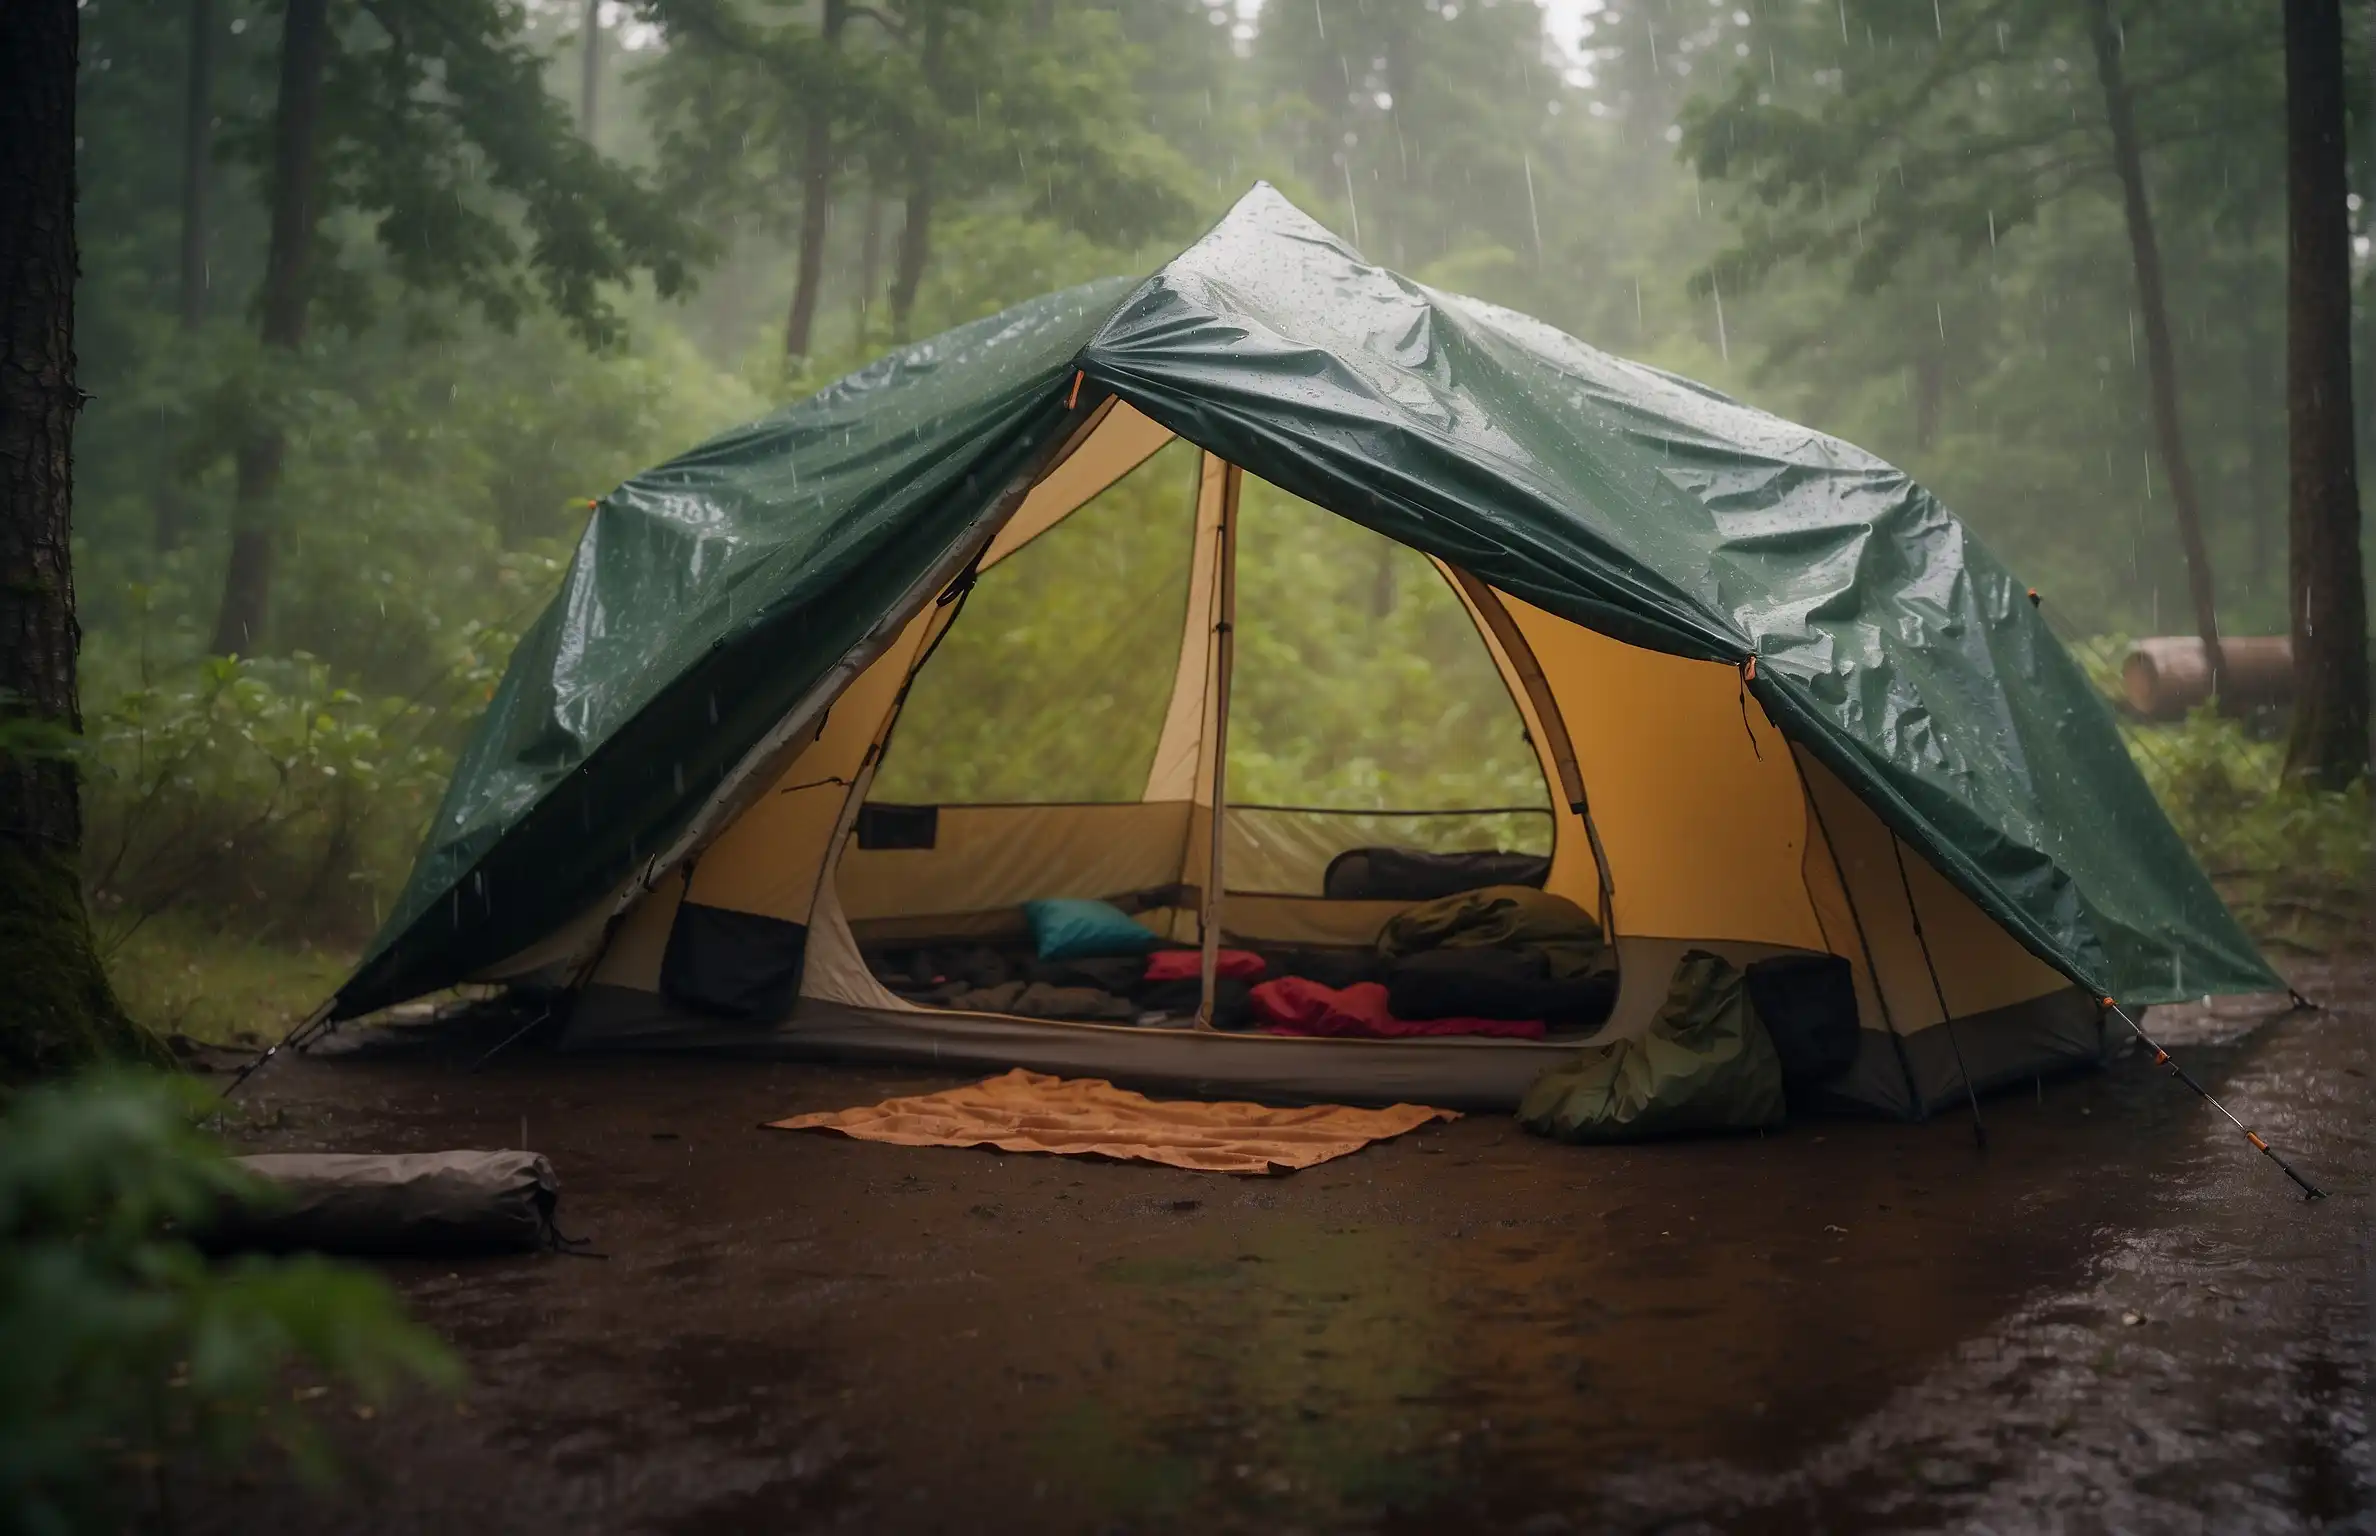 Keep Bedding Dry When Camping